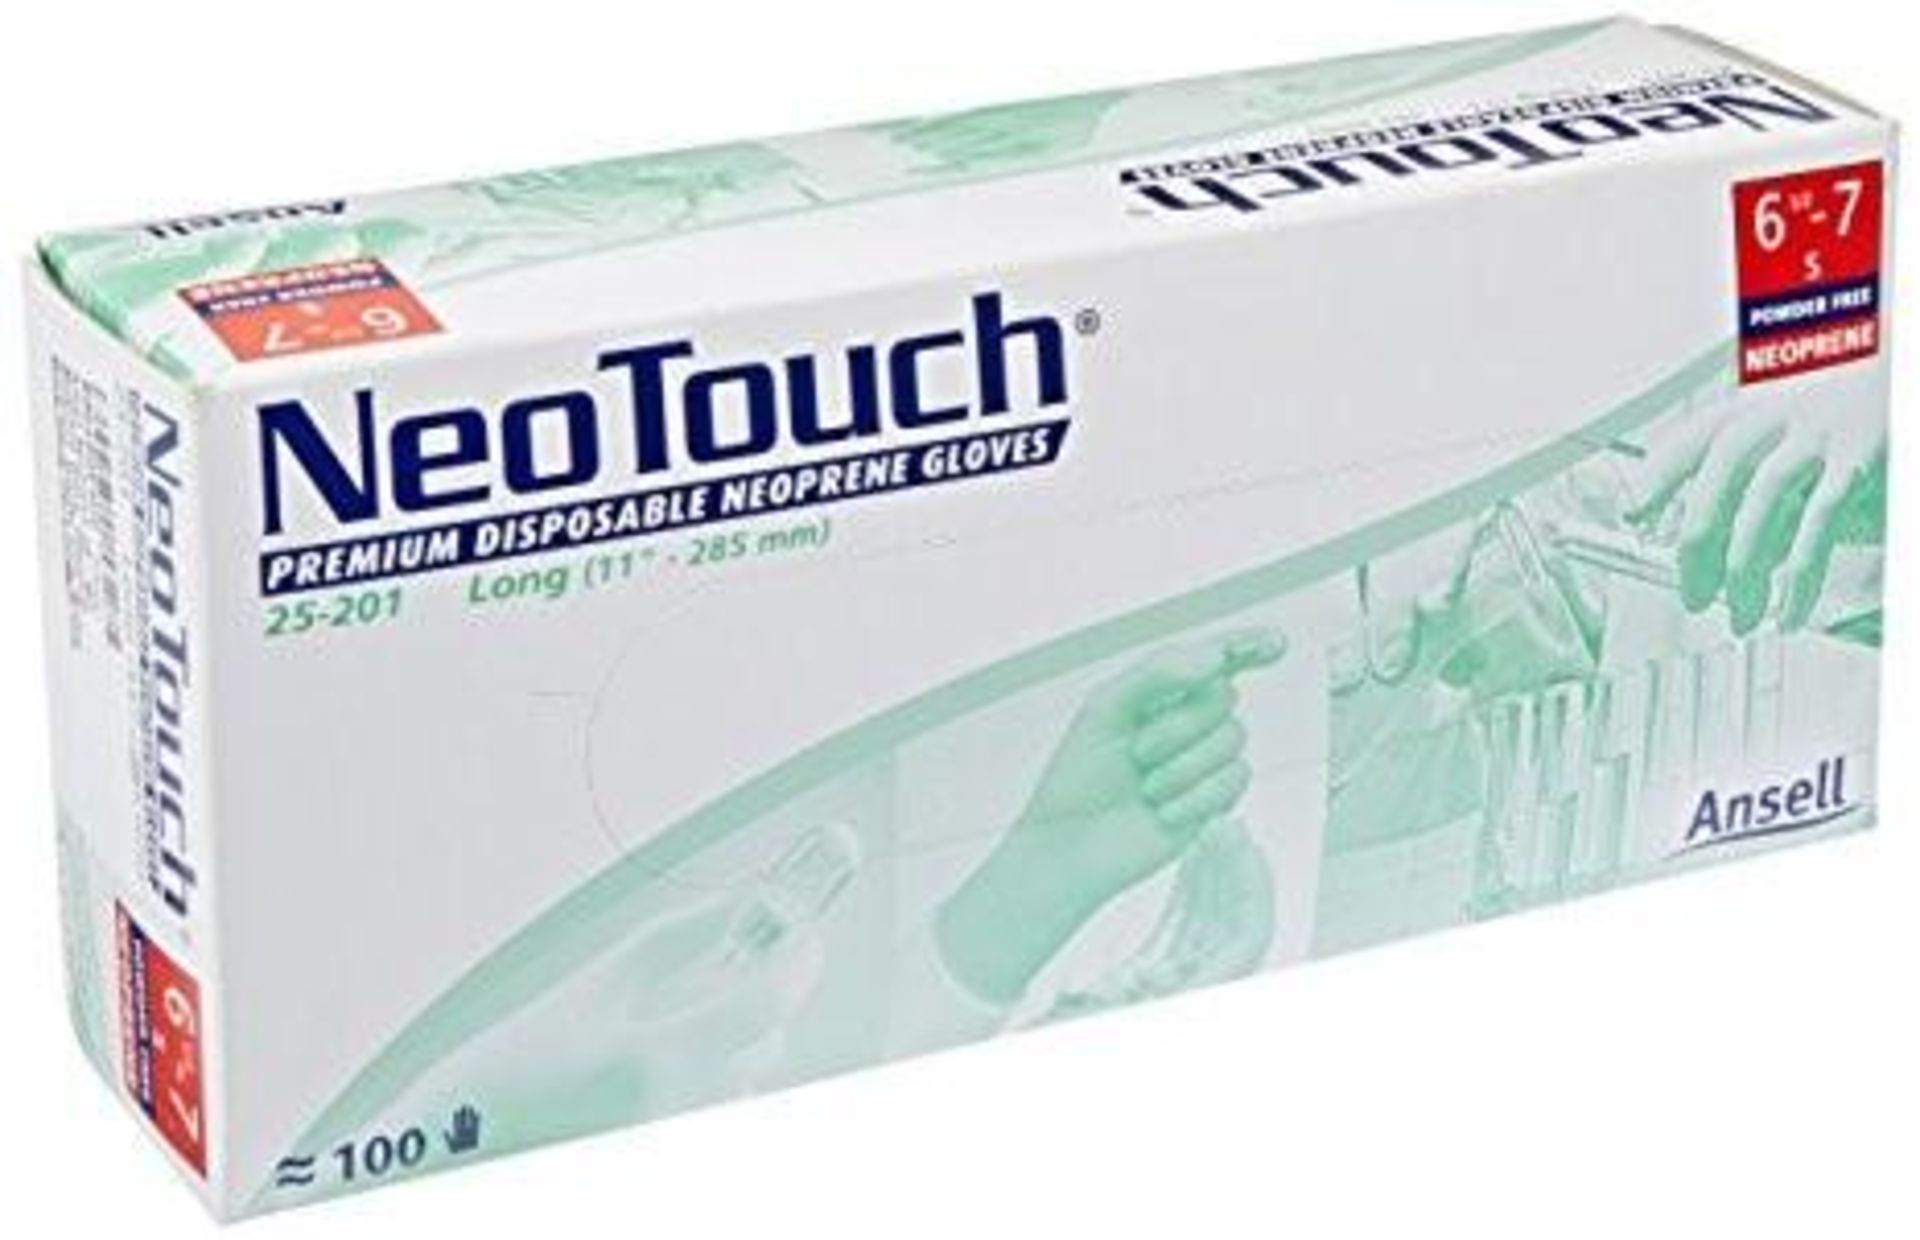 2 x Boxes of Ansell Neotouch Premium Disposable Long 11" 290mm Neoprene Gloves - Size 6.5-7 (S) -